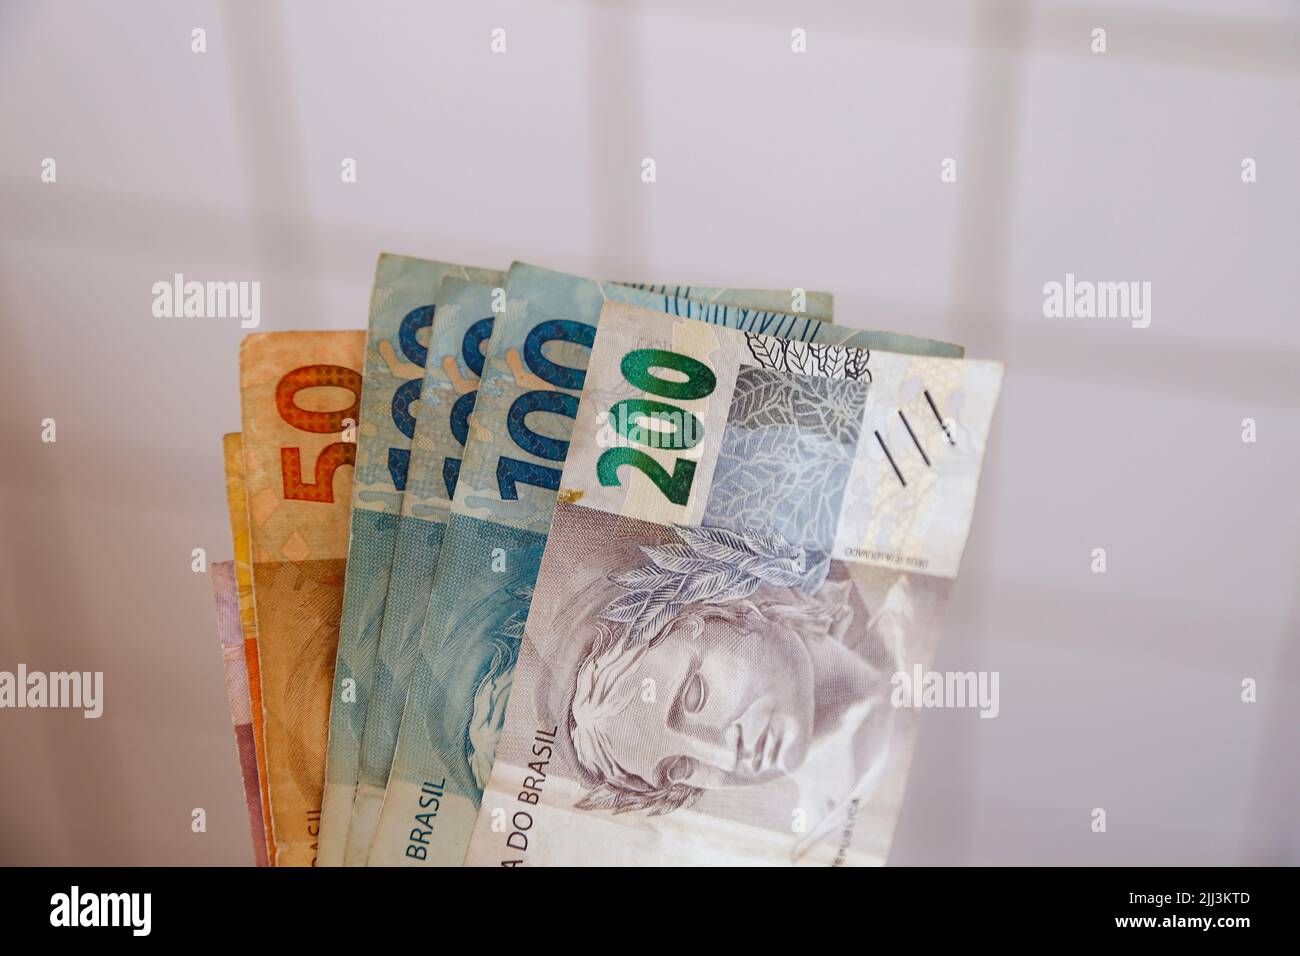 various banknotes from brazil - brazilian real banknotes Stock Photo